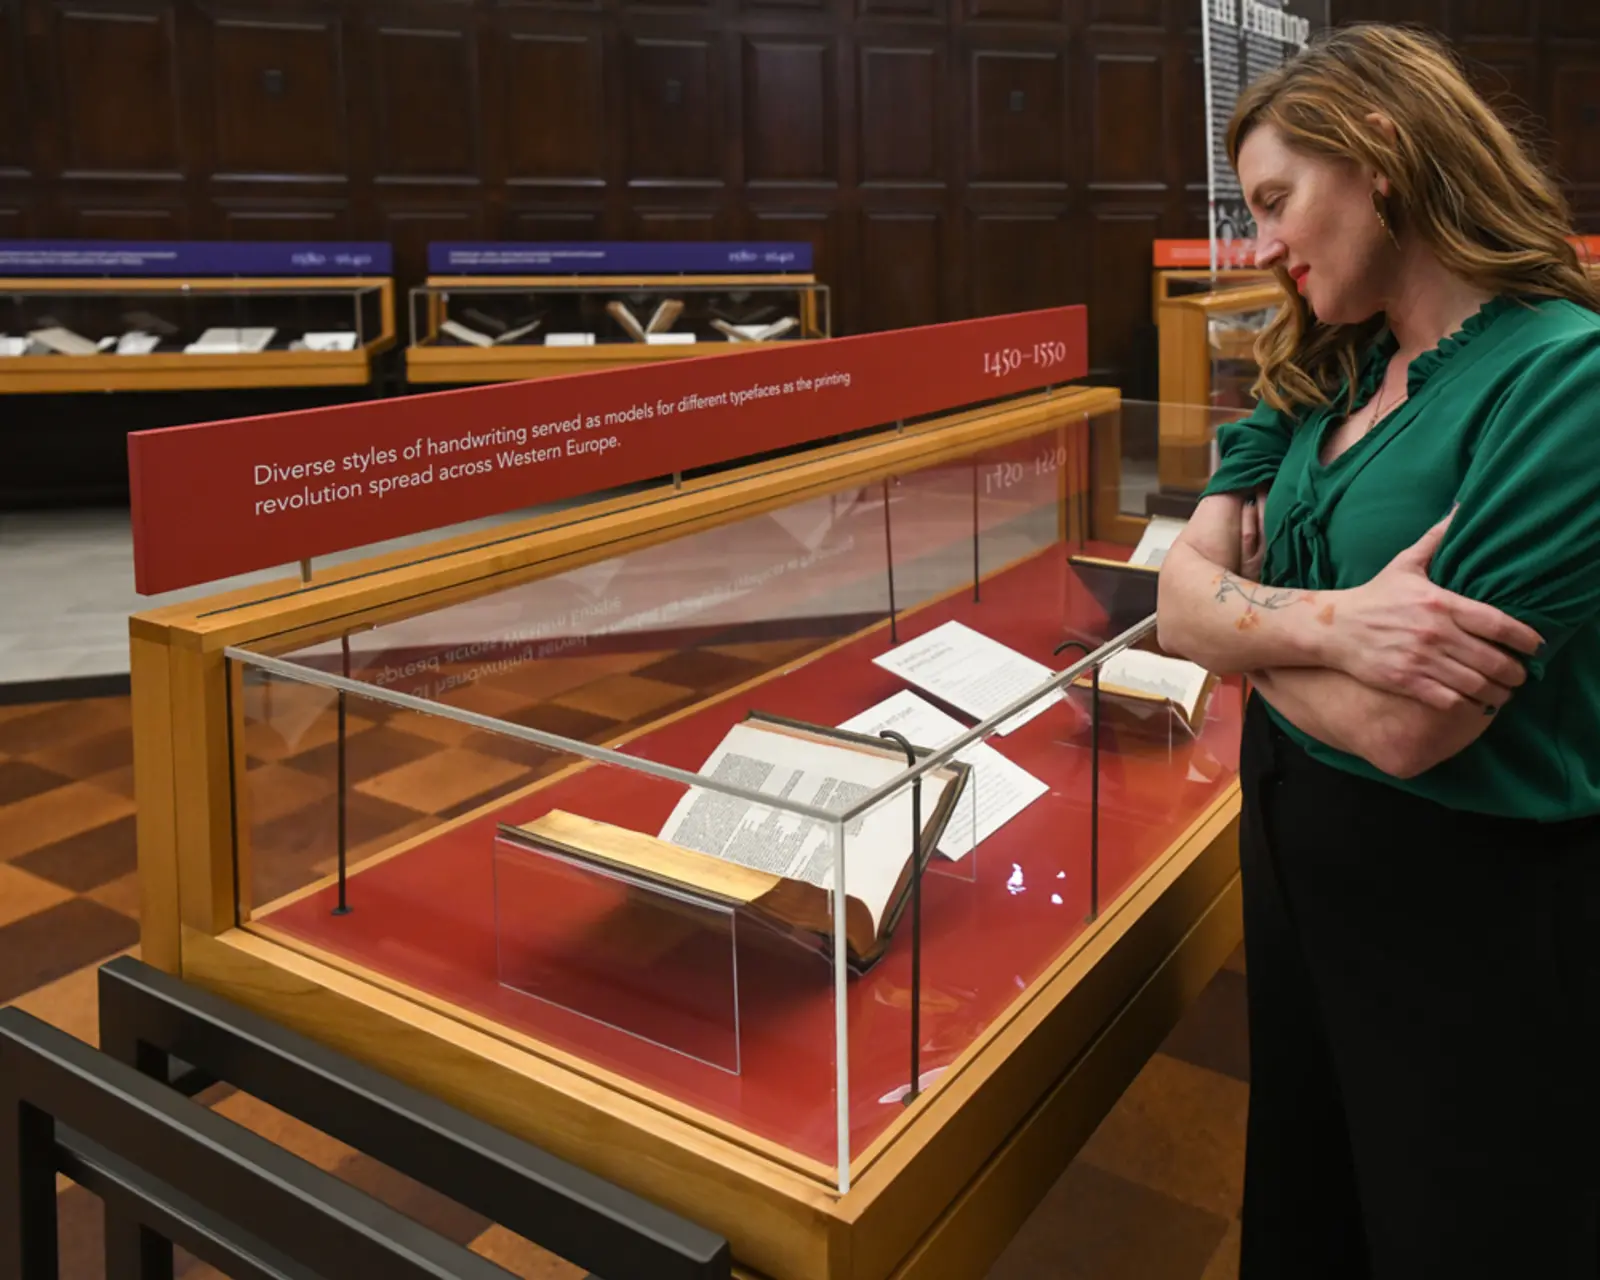 A person looks at a book in a glass case in a library.